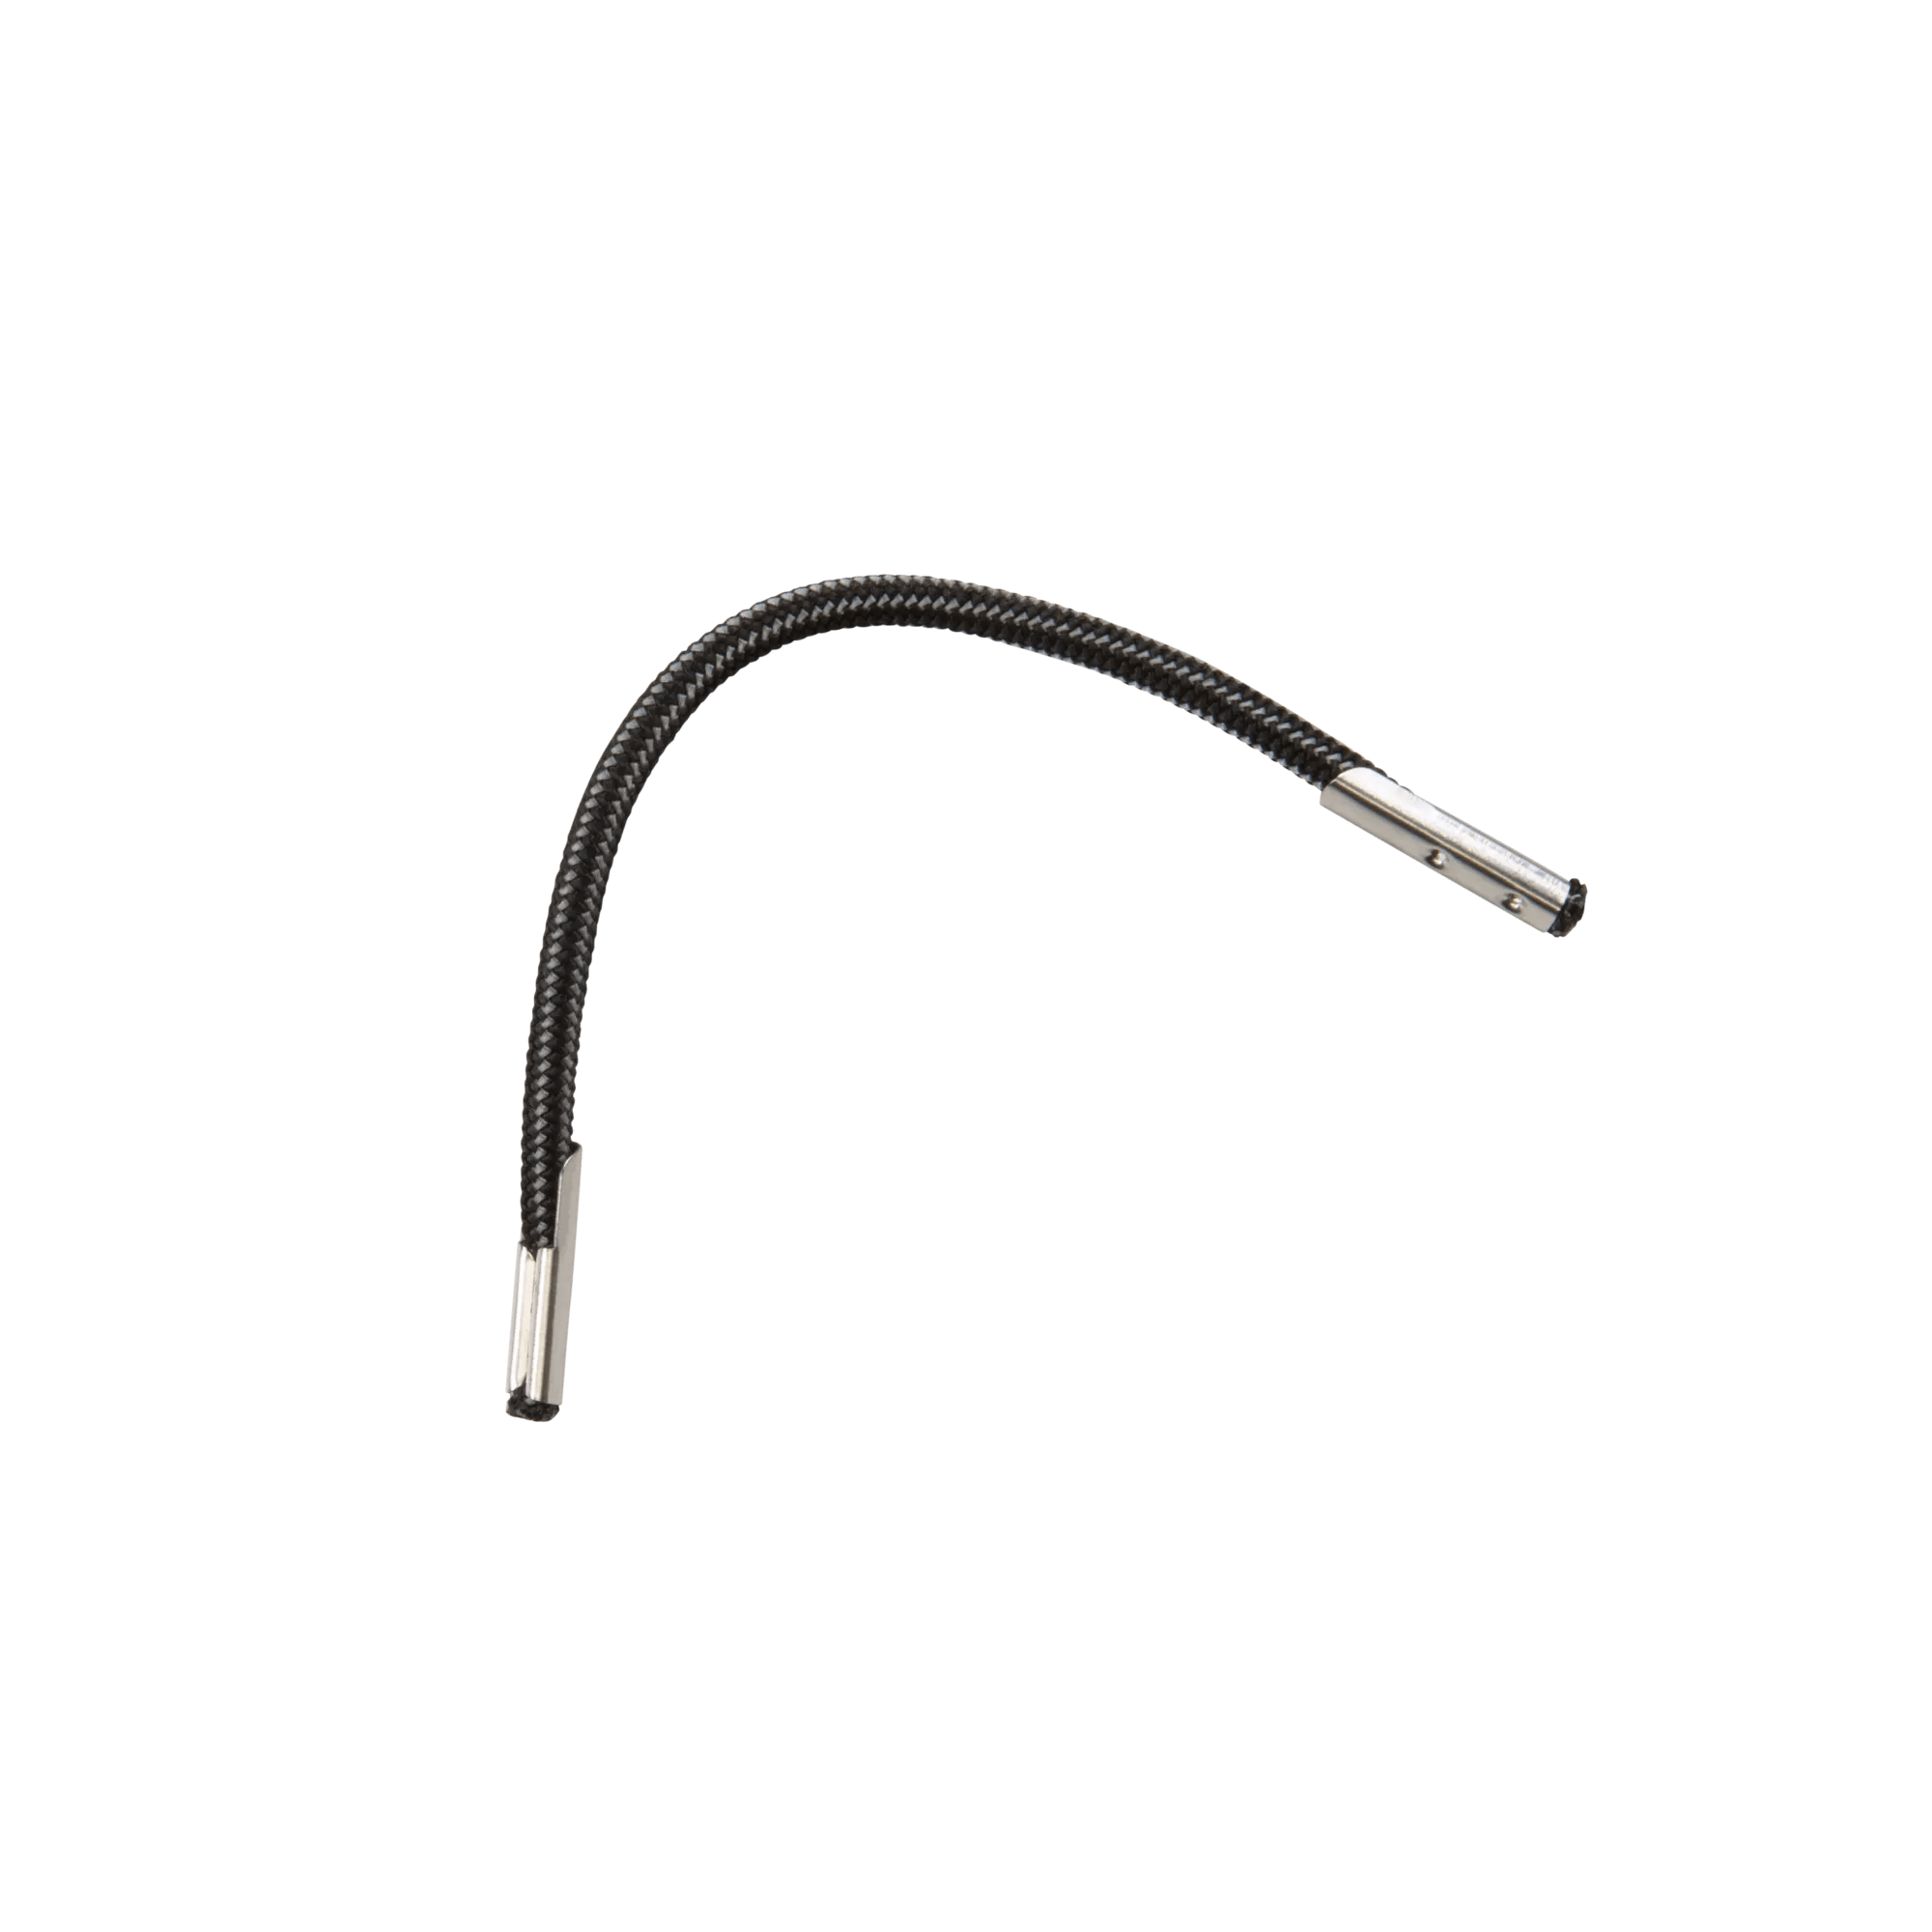 PELICAN - Black & Gray 8" (20.3 cm) Dashboard Bungee Cord -  - PS1459 - ISO